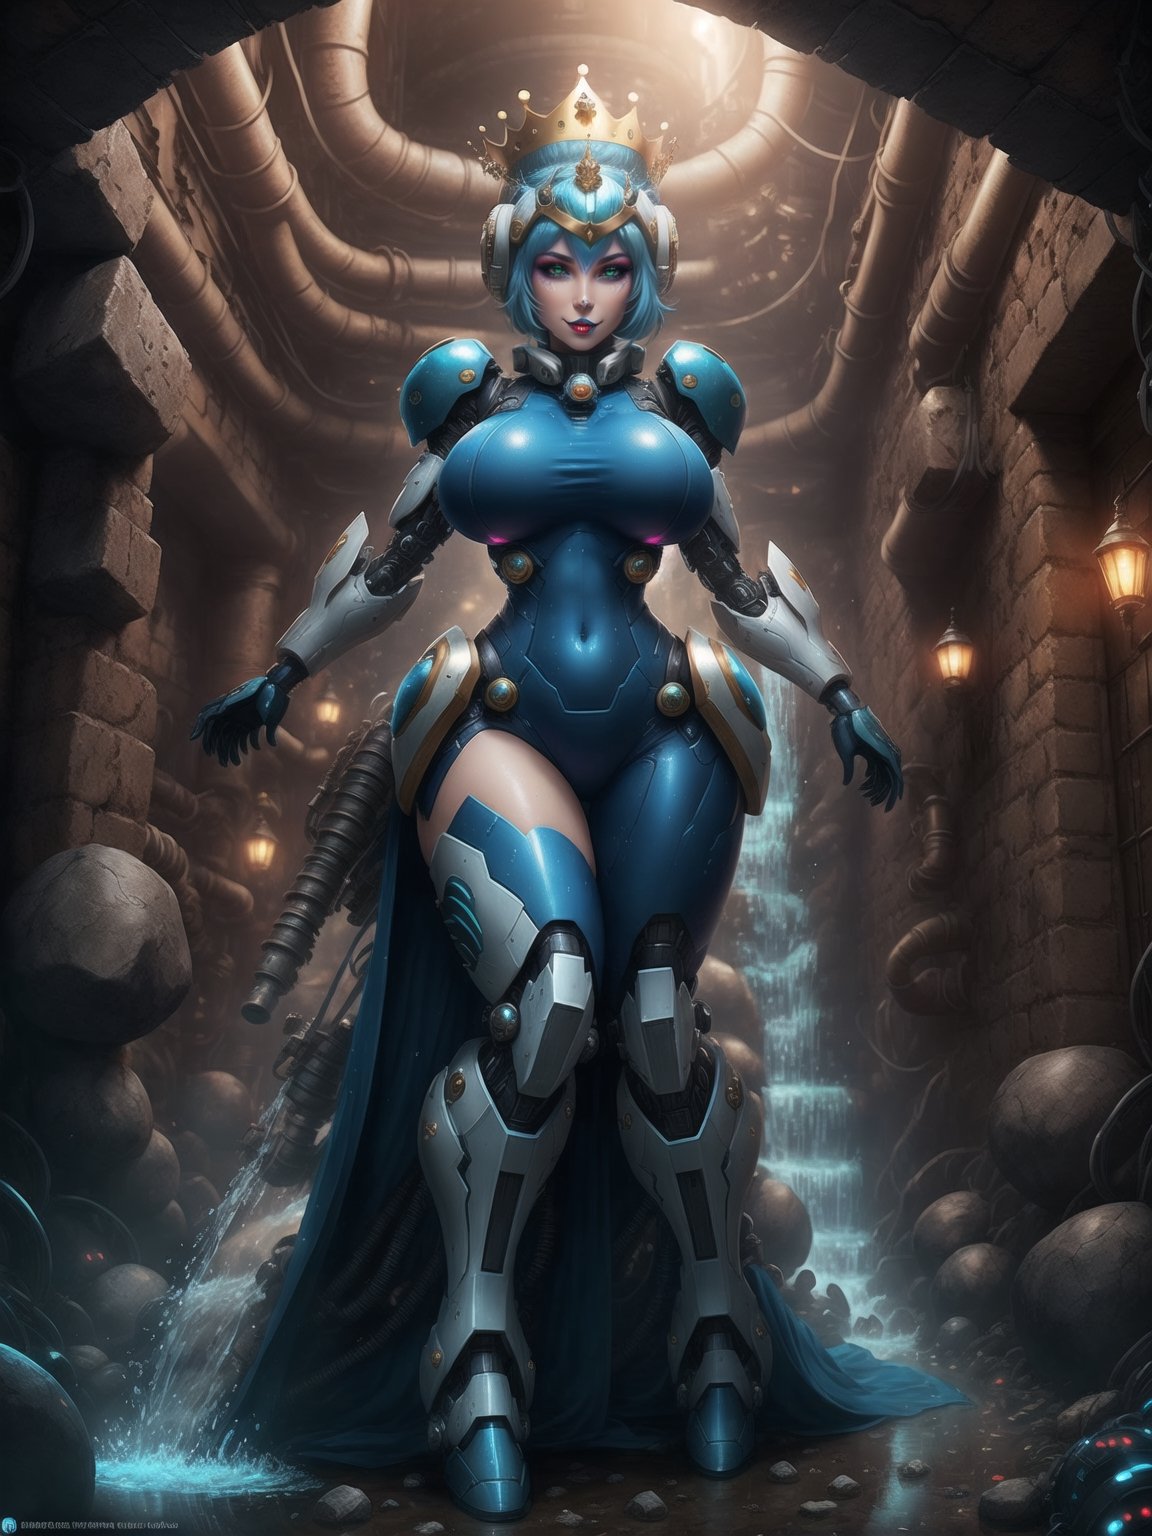 [Princess Peach], has gigantic breasts, wearing mecha suit with blue parts, totally white mecha suit, very tight mecha suit on the body, ((wearing a crown + cybernetic helmet)), short hair, blue hair, mohawk hair, hair with bangs in front of the eyes, she is in a dungeon, with many pipes, large stone structures, machines, monsters, dirty water waterfall, Super Mario Bros, super metroid, 16K, UHD, best possible quality, ultra detailed, best possible resolution, ultra technological, futuristic, robotic, Unreal Engine 5, professional photography, she is ((sensual pose with interaction and leaning on anything + object + on something + leaning against)), perfect anatomy ((full body)), More detail, better_hands.